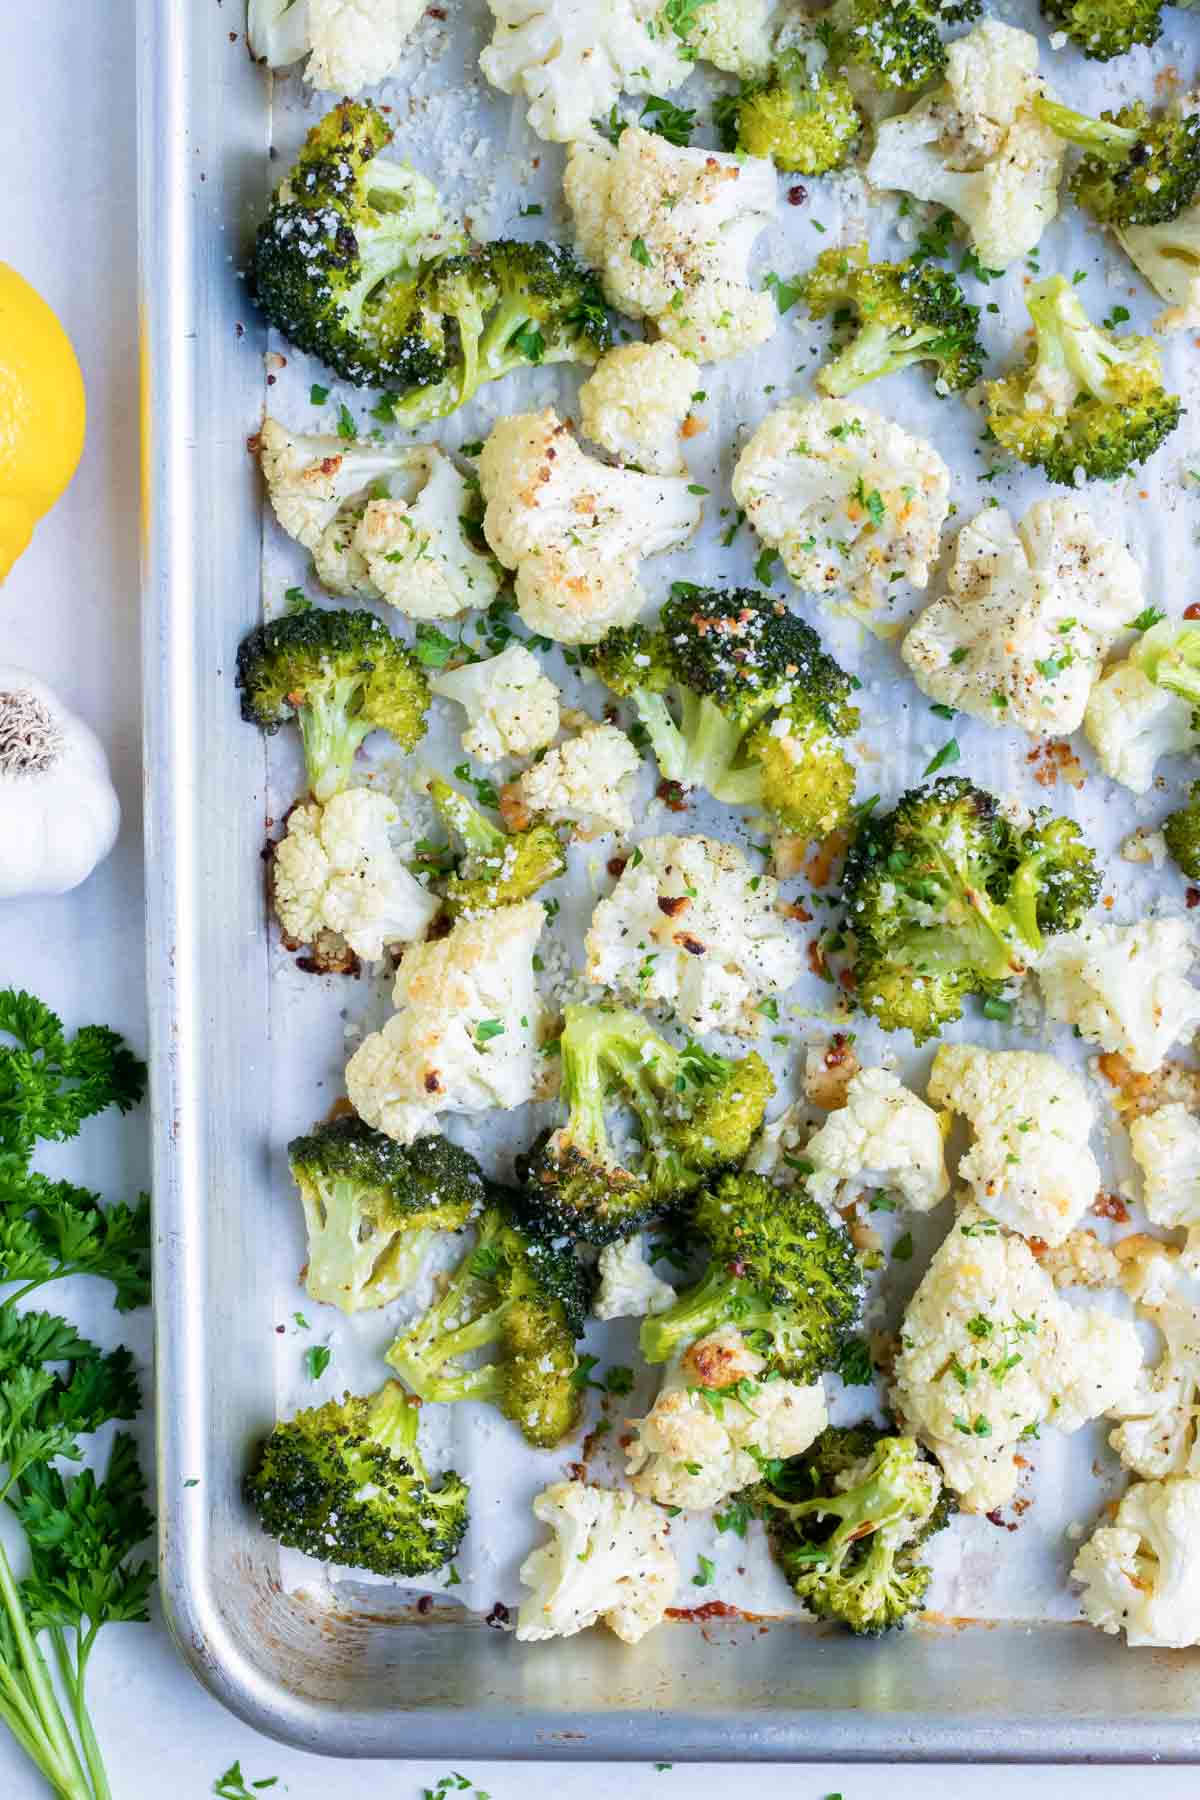 Parmesan garlic roasted broccoli cauliflower are baked in the oven for an easy side.